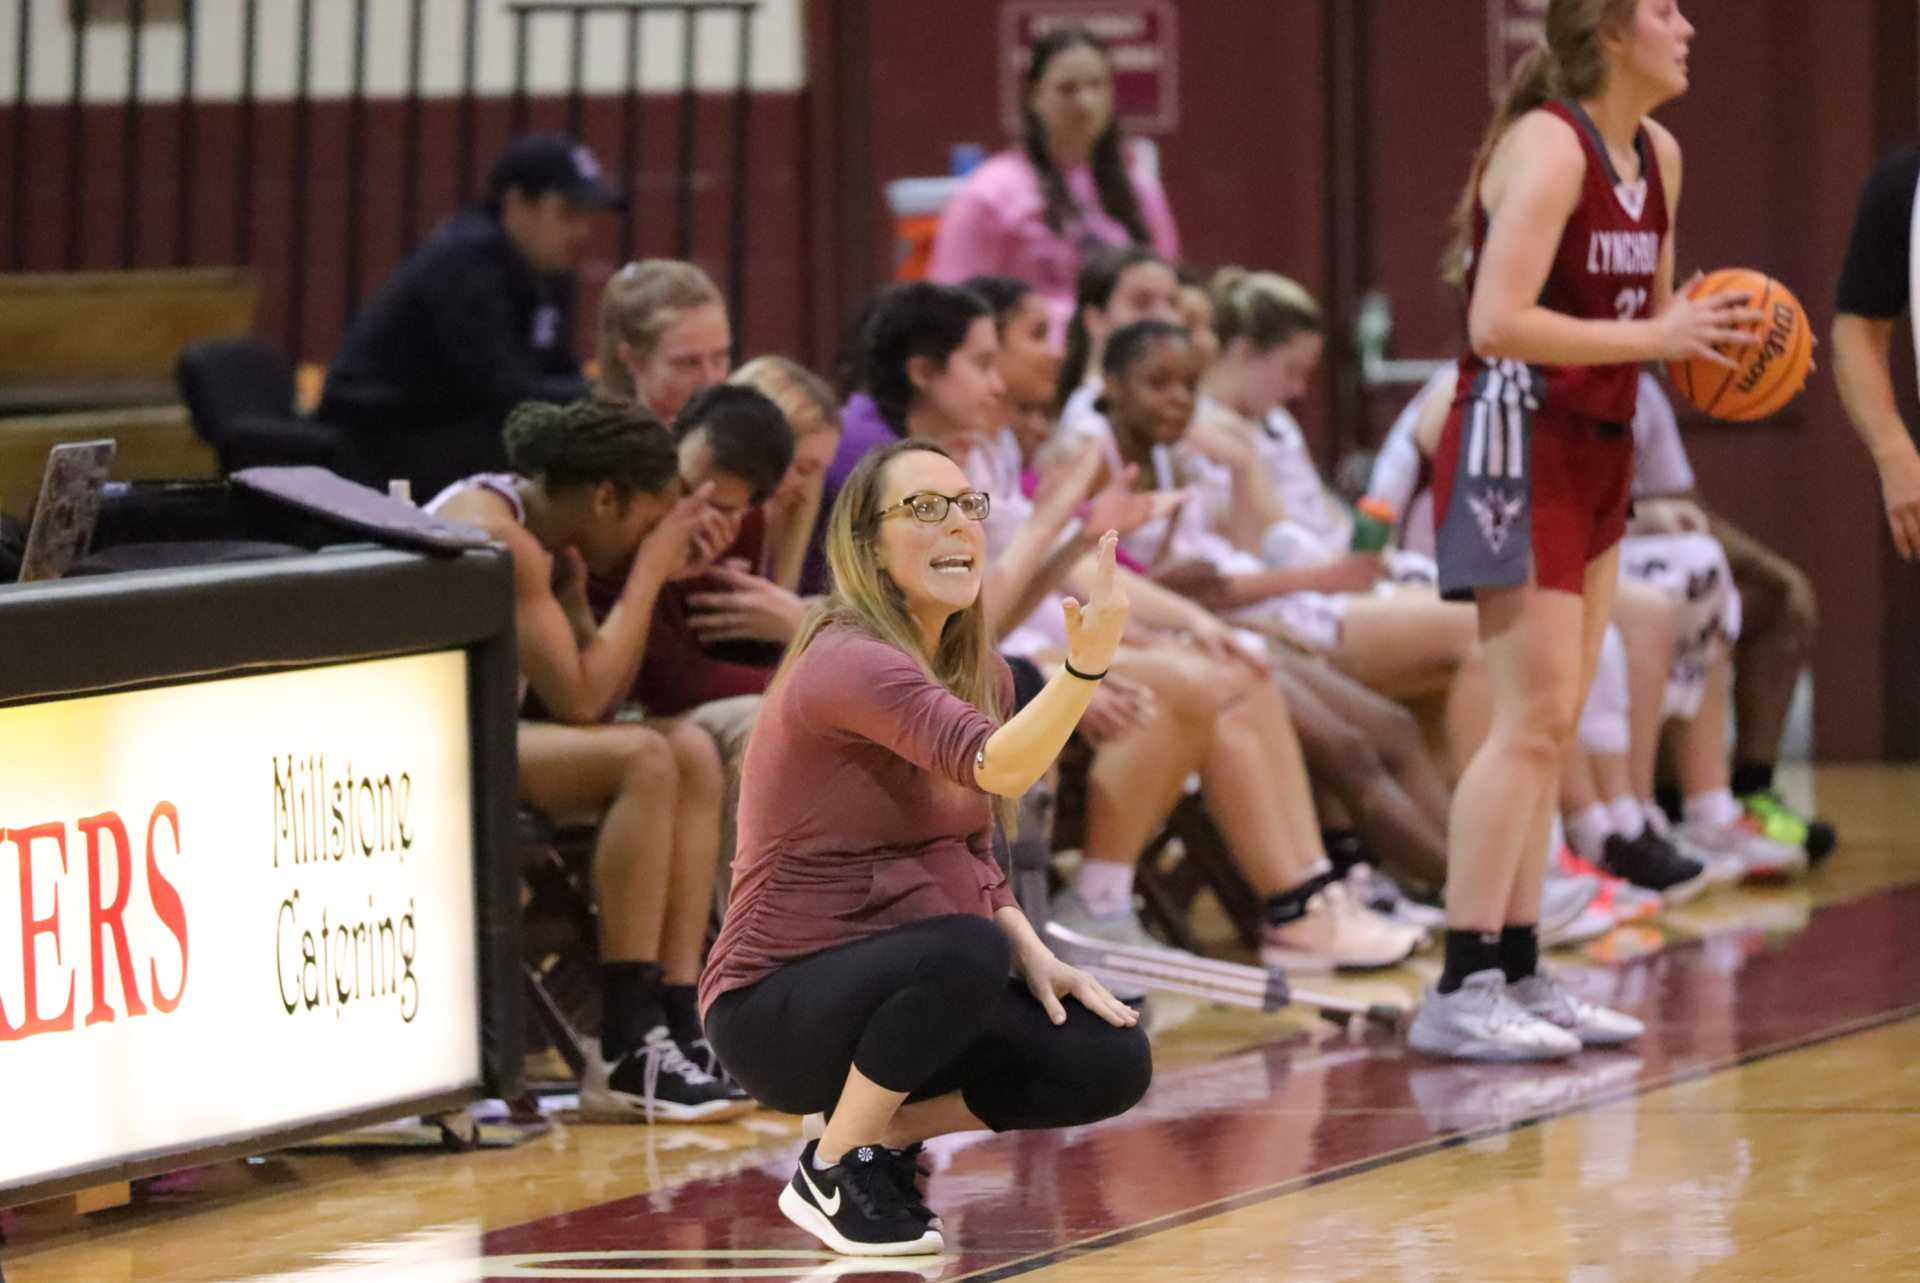 New head women's basketball coach eager to build upon the legacy